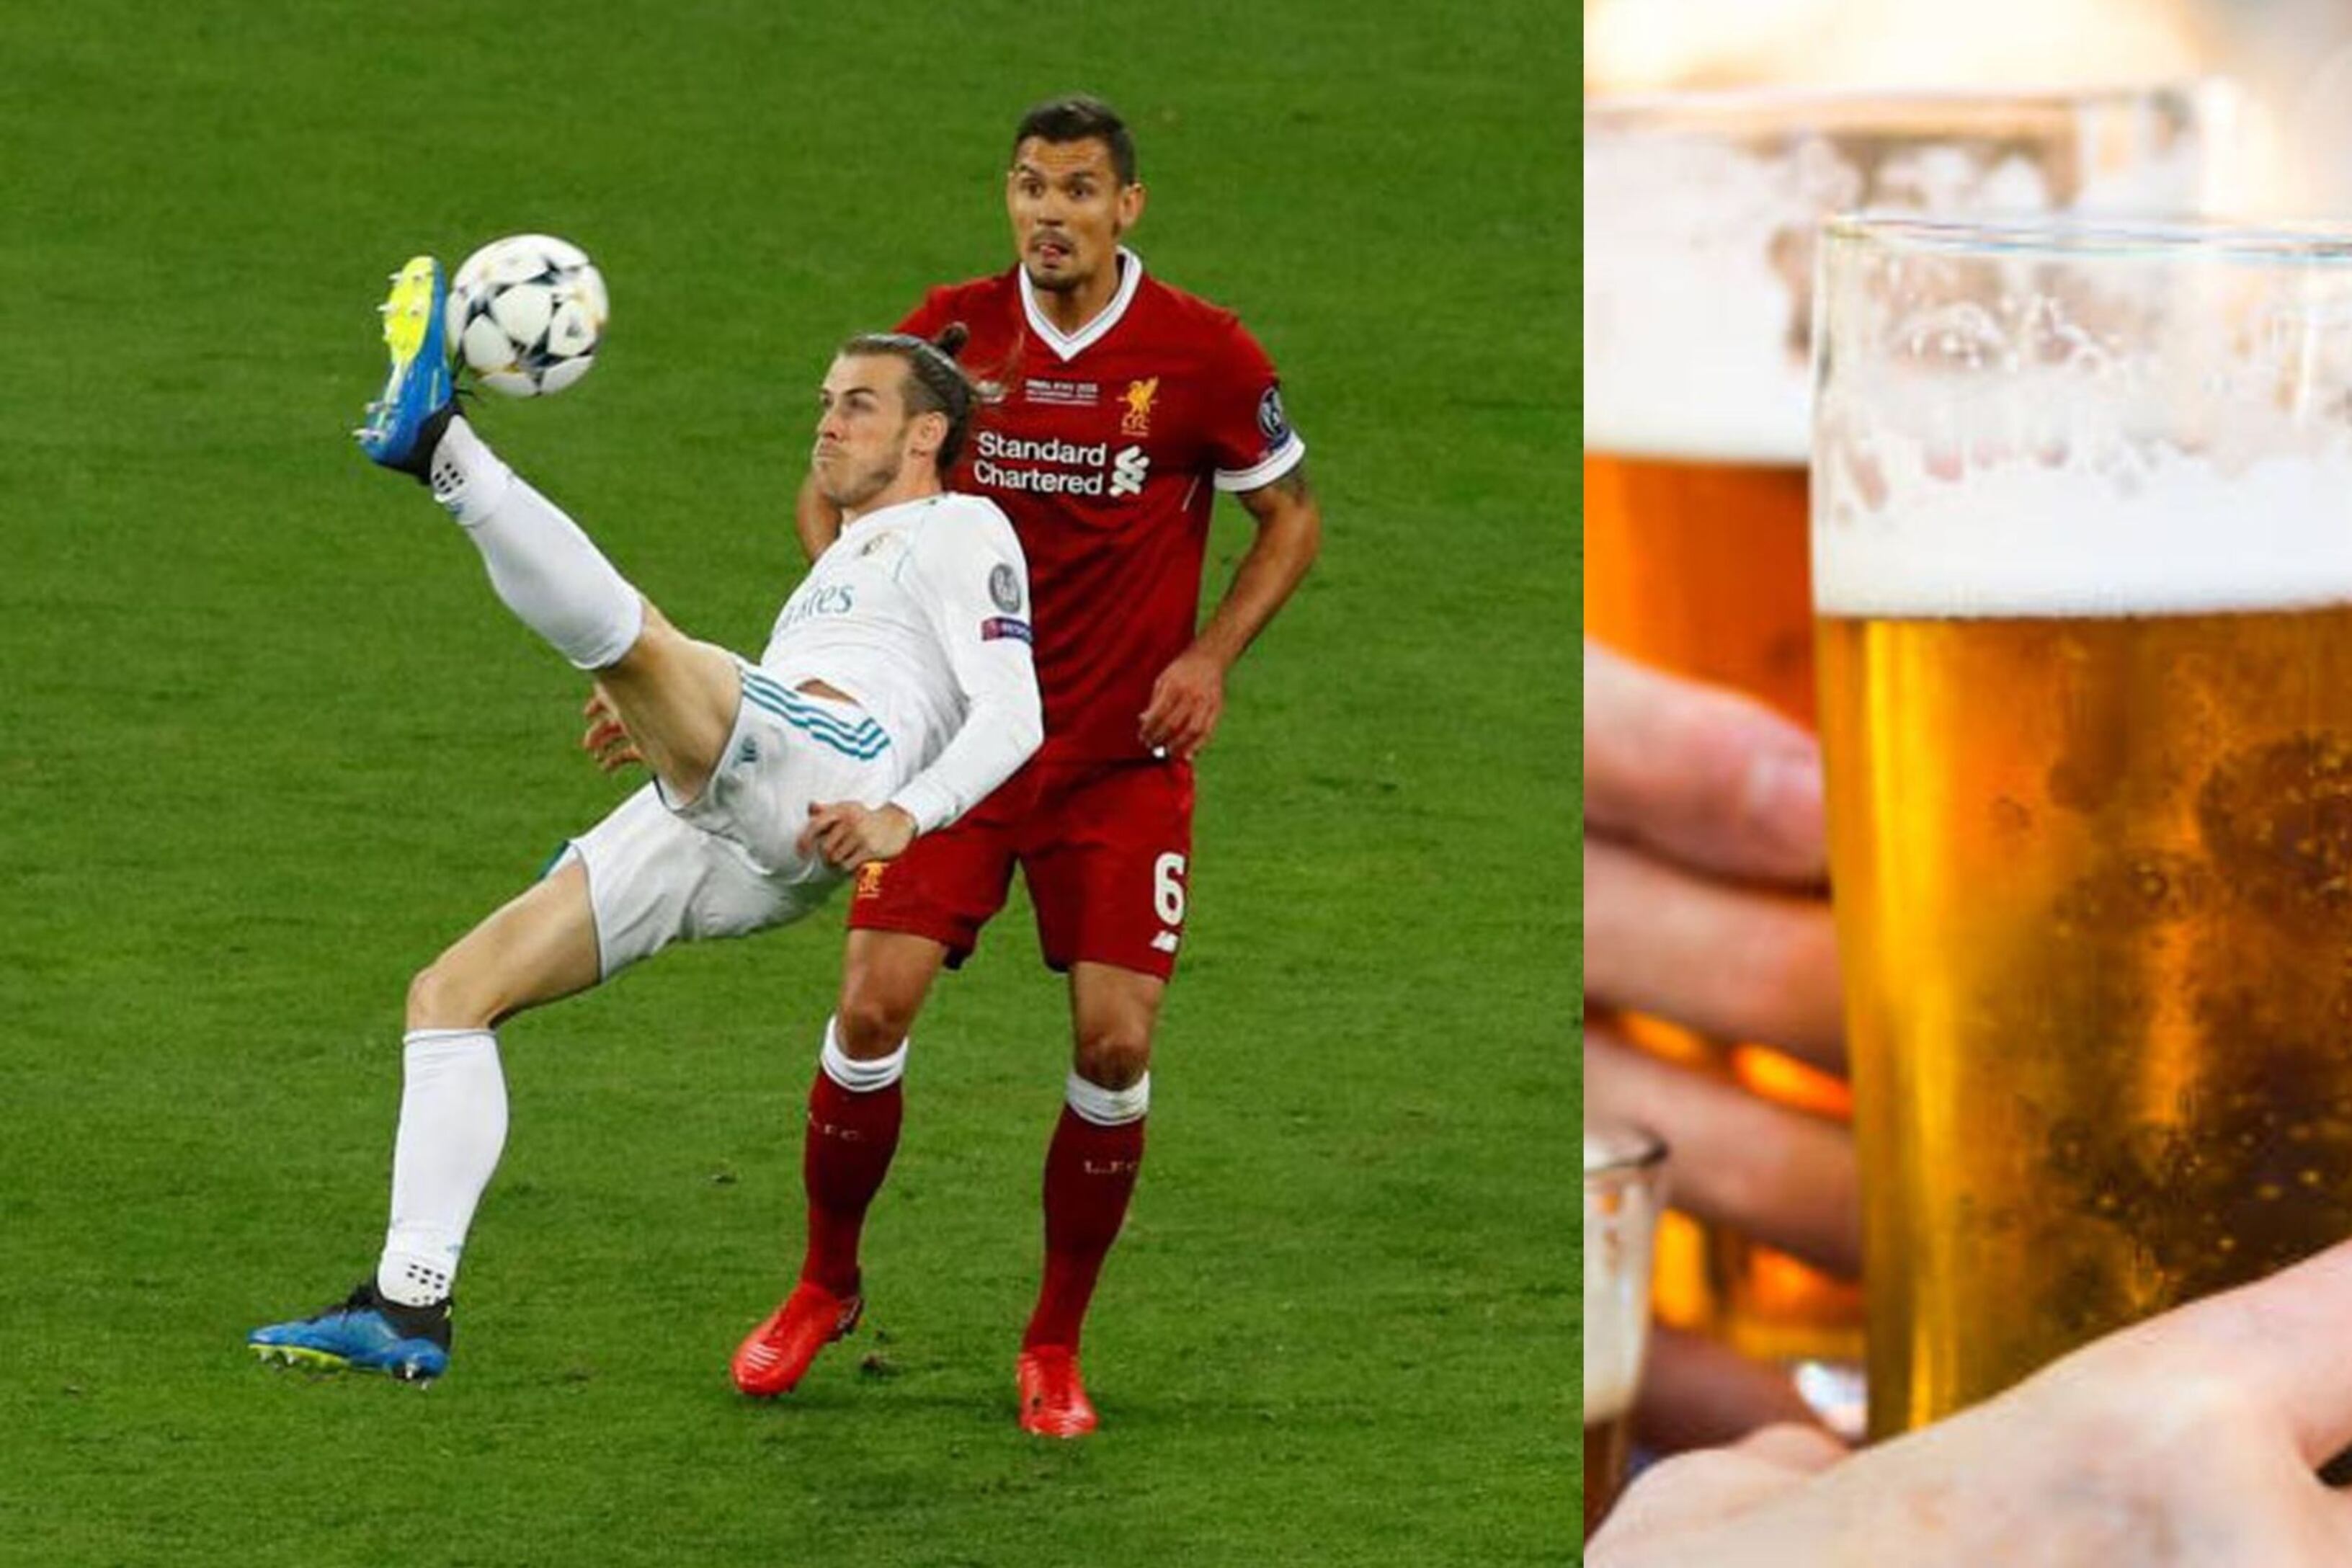 He won 5 Champions Leagues with Real Madrid, now he sells beer for a living